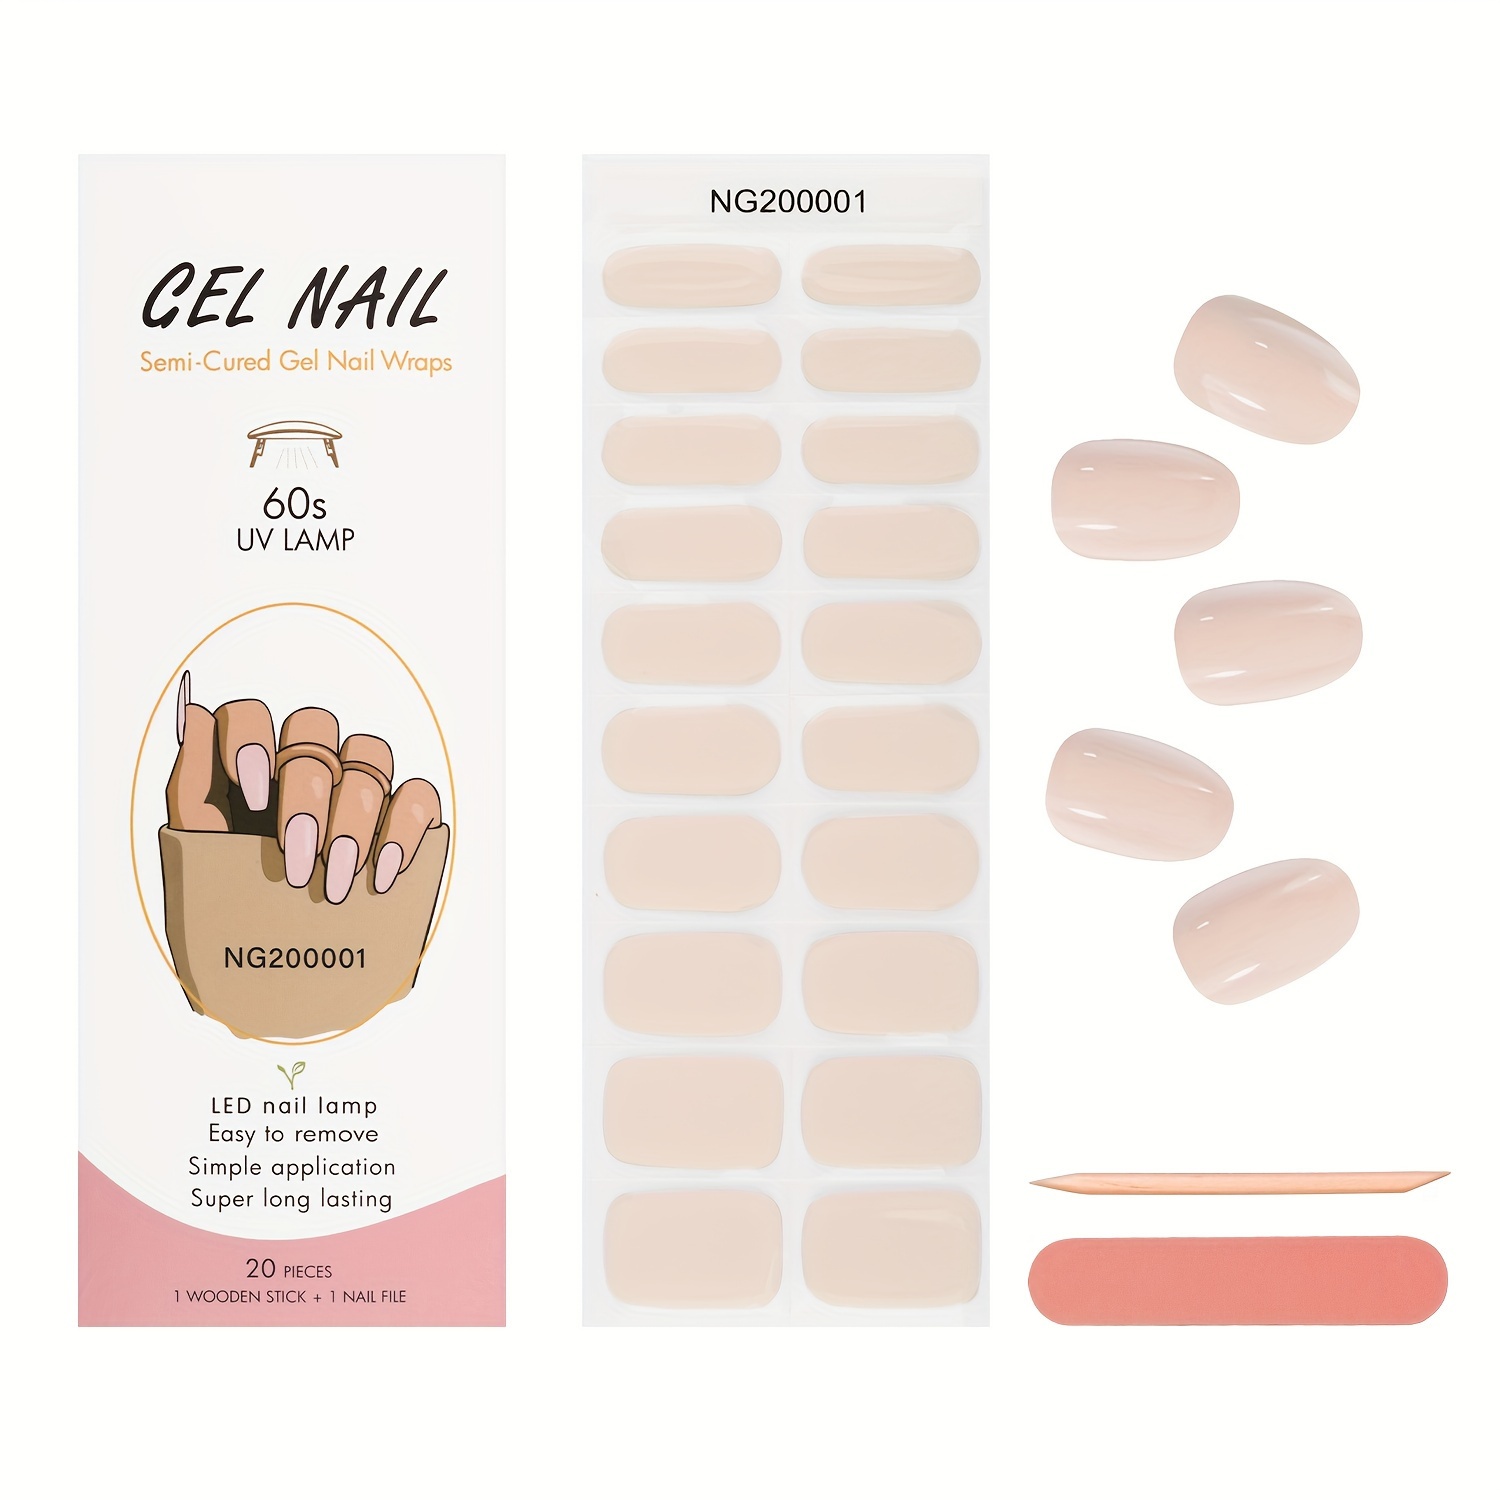 

Semi Cured Gel Nail Wraps, Light Pinkish Semi-cured Gel Nail Strips-works With Any Nail Lamps, Salon-quality,long Lasting,easy To Apply & Remove-includes Nail File & Wooden Stick